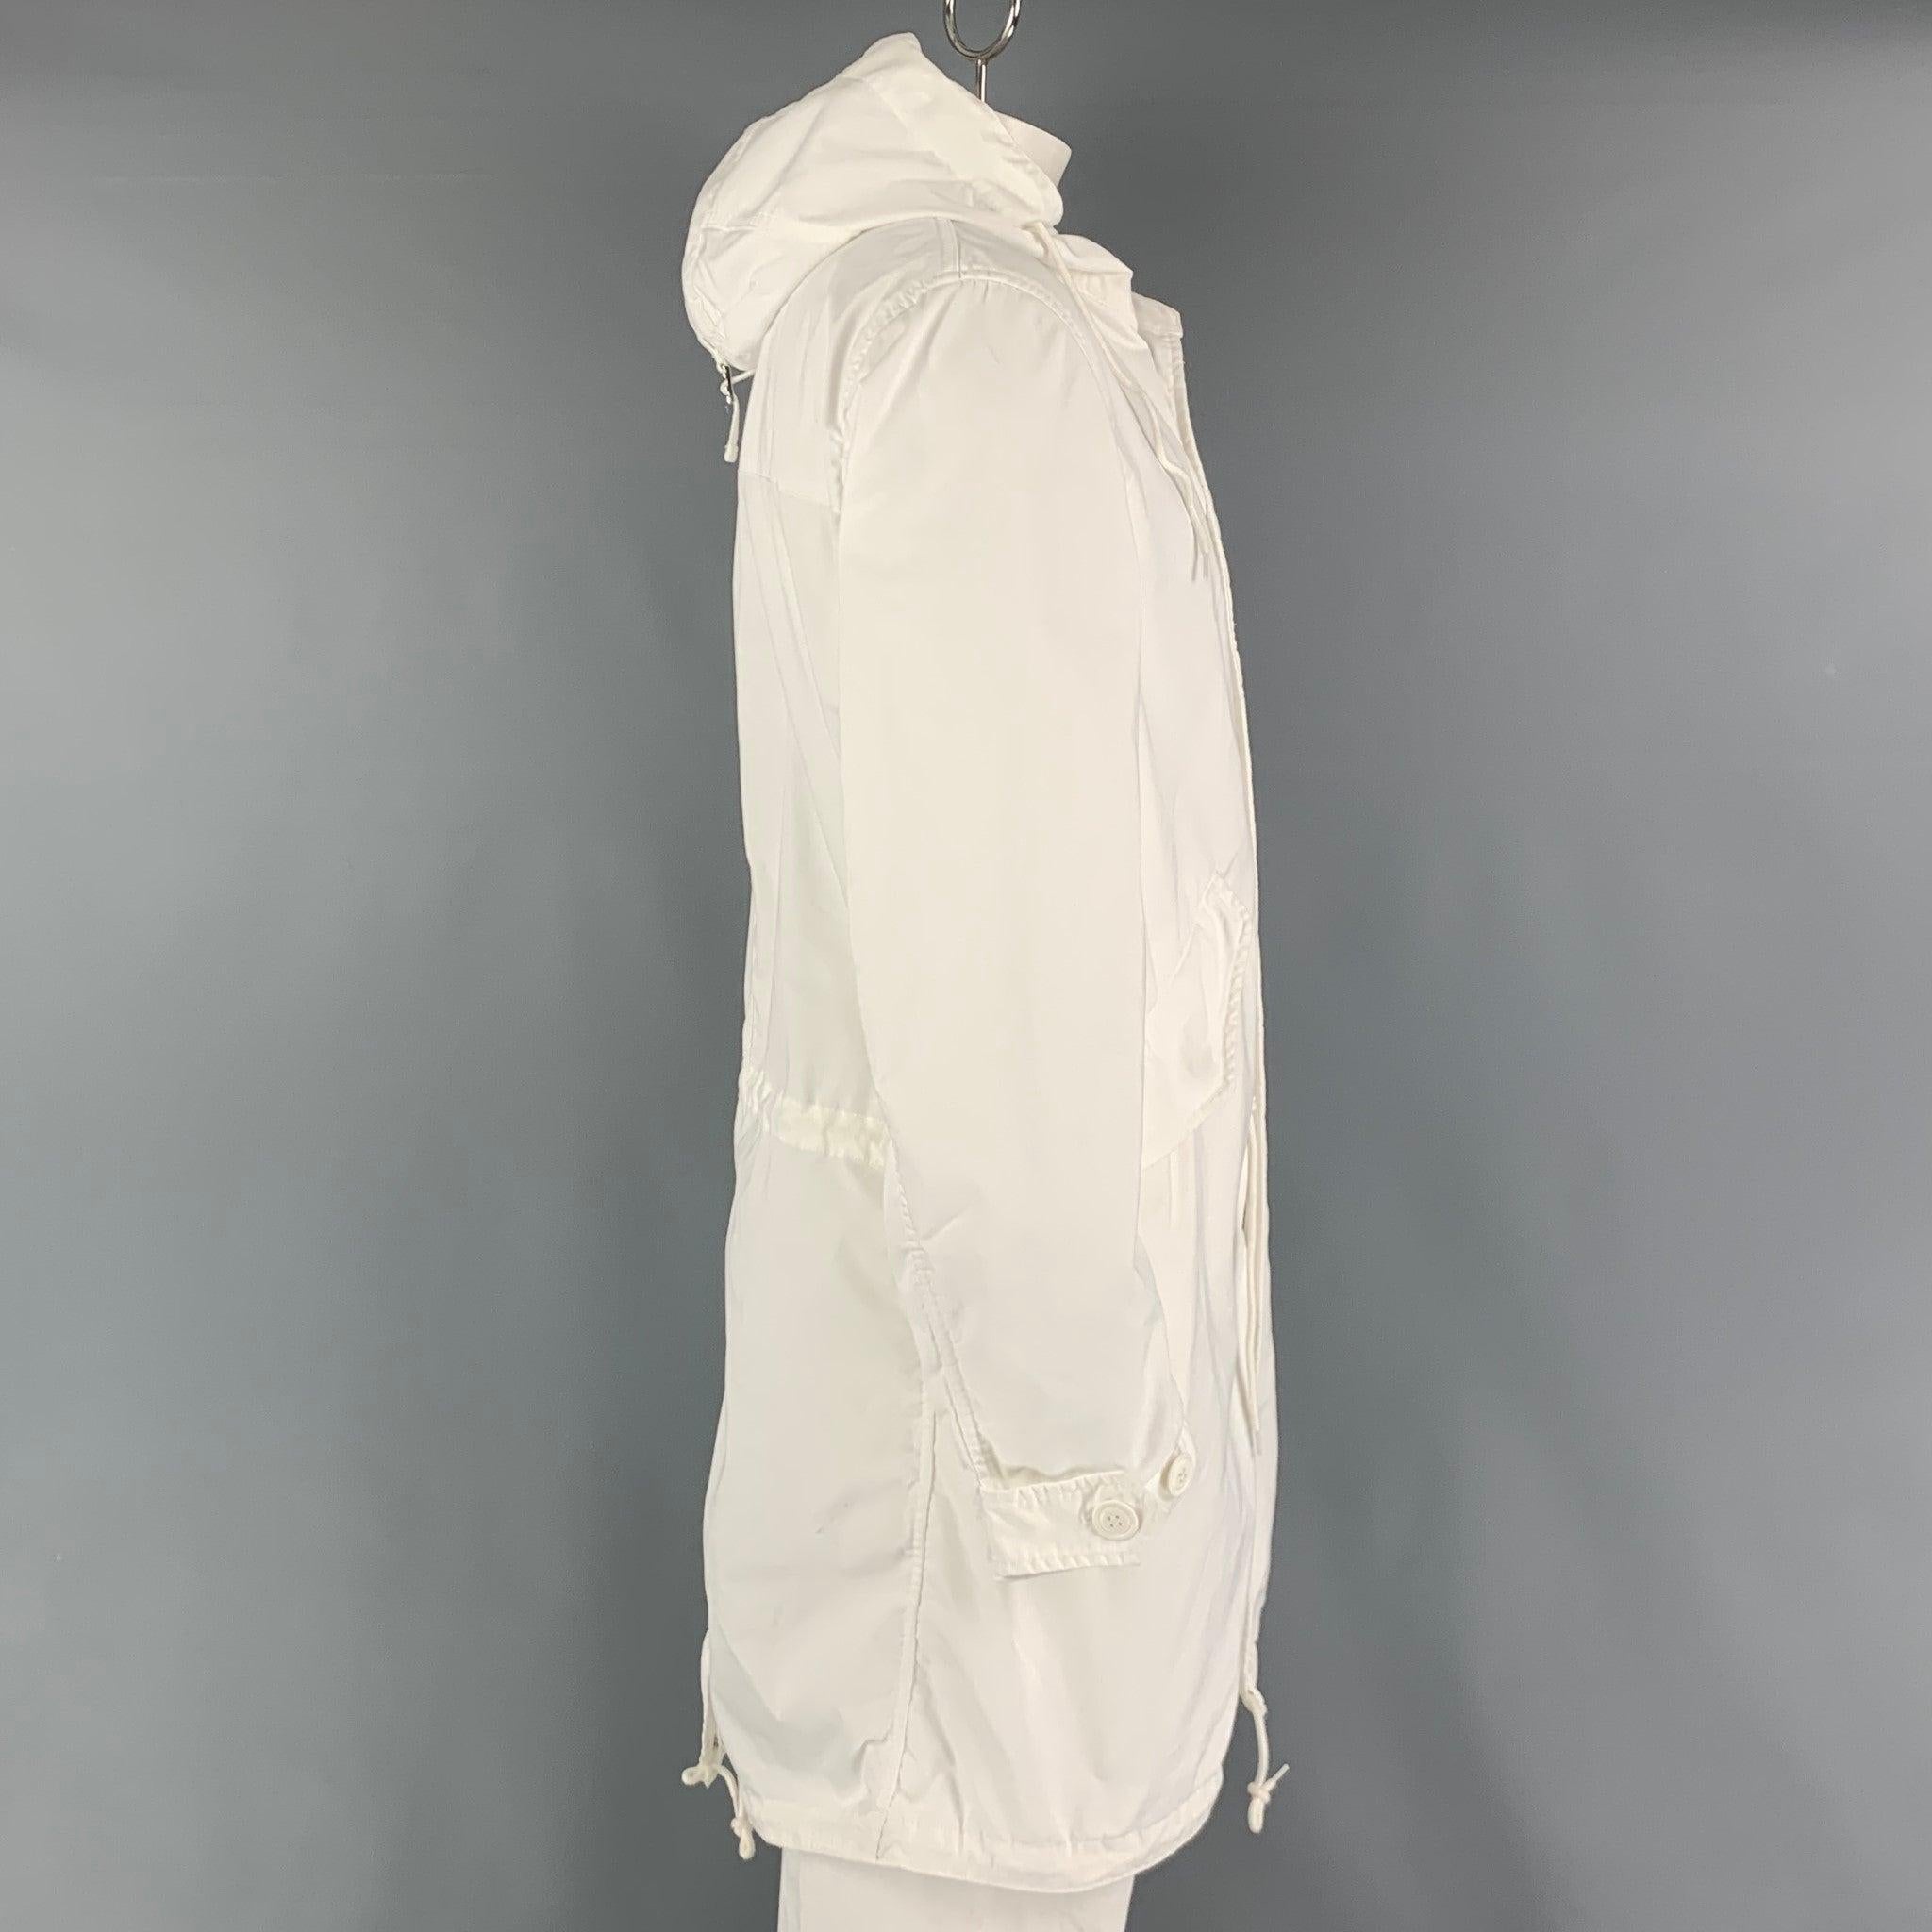 COMME des GARCONS HOMME AD2018 long coat comes in a white polyester material featuring a parka hooded style, large flap pockets, oversized fit, drawstring details, and a hidden zip & snap button closure. Made in Japan.Very Good Pre-Owned